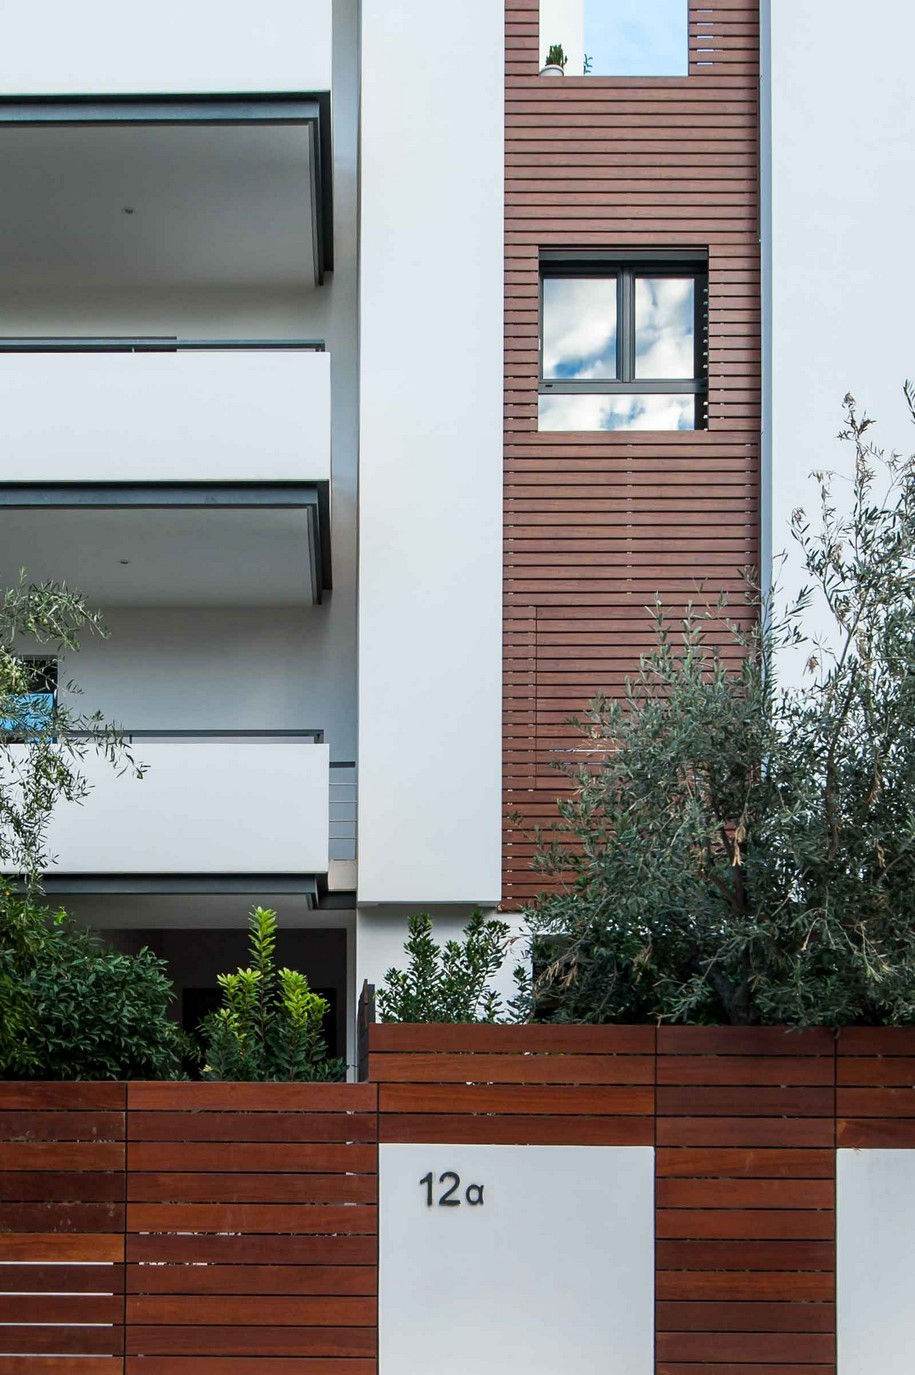 seamless, building, house, home, residence, athens, suburbs, private housing, garden, block